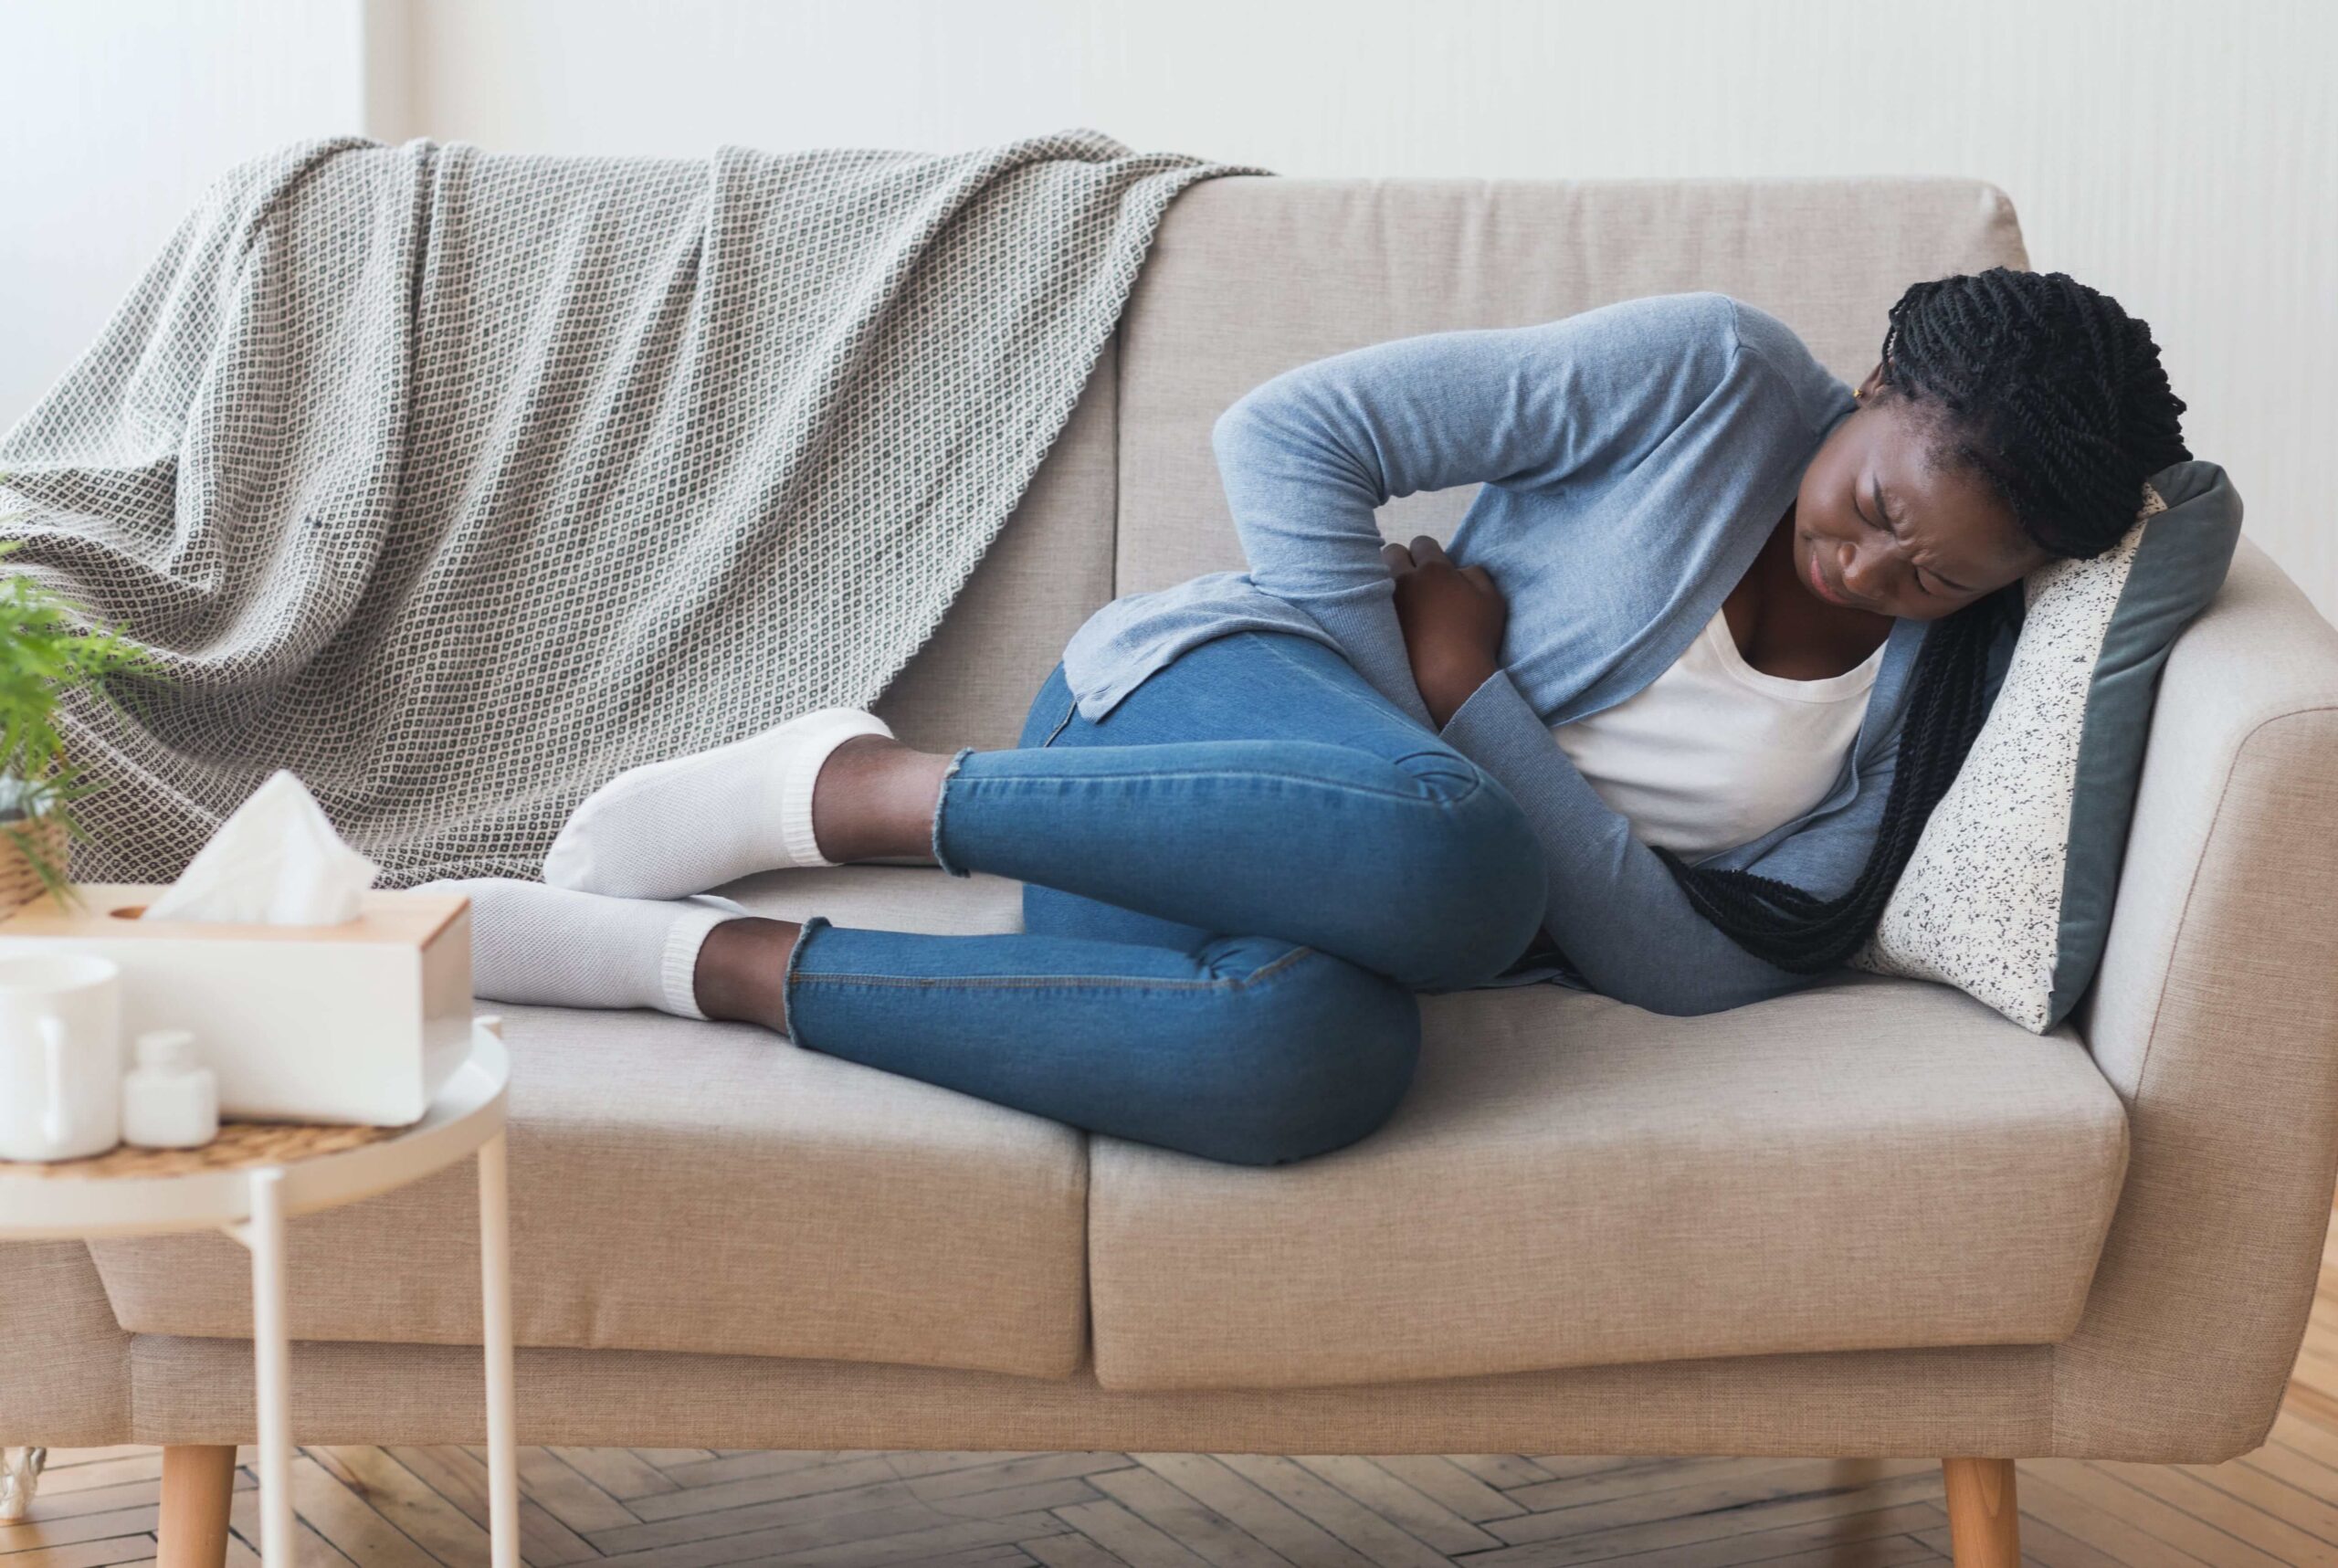 A woman is curled up on the sofa, holding her hands to her stomach and wincing in pain.